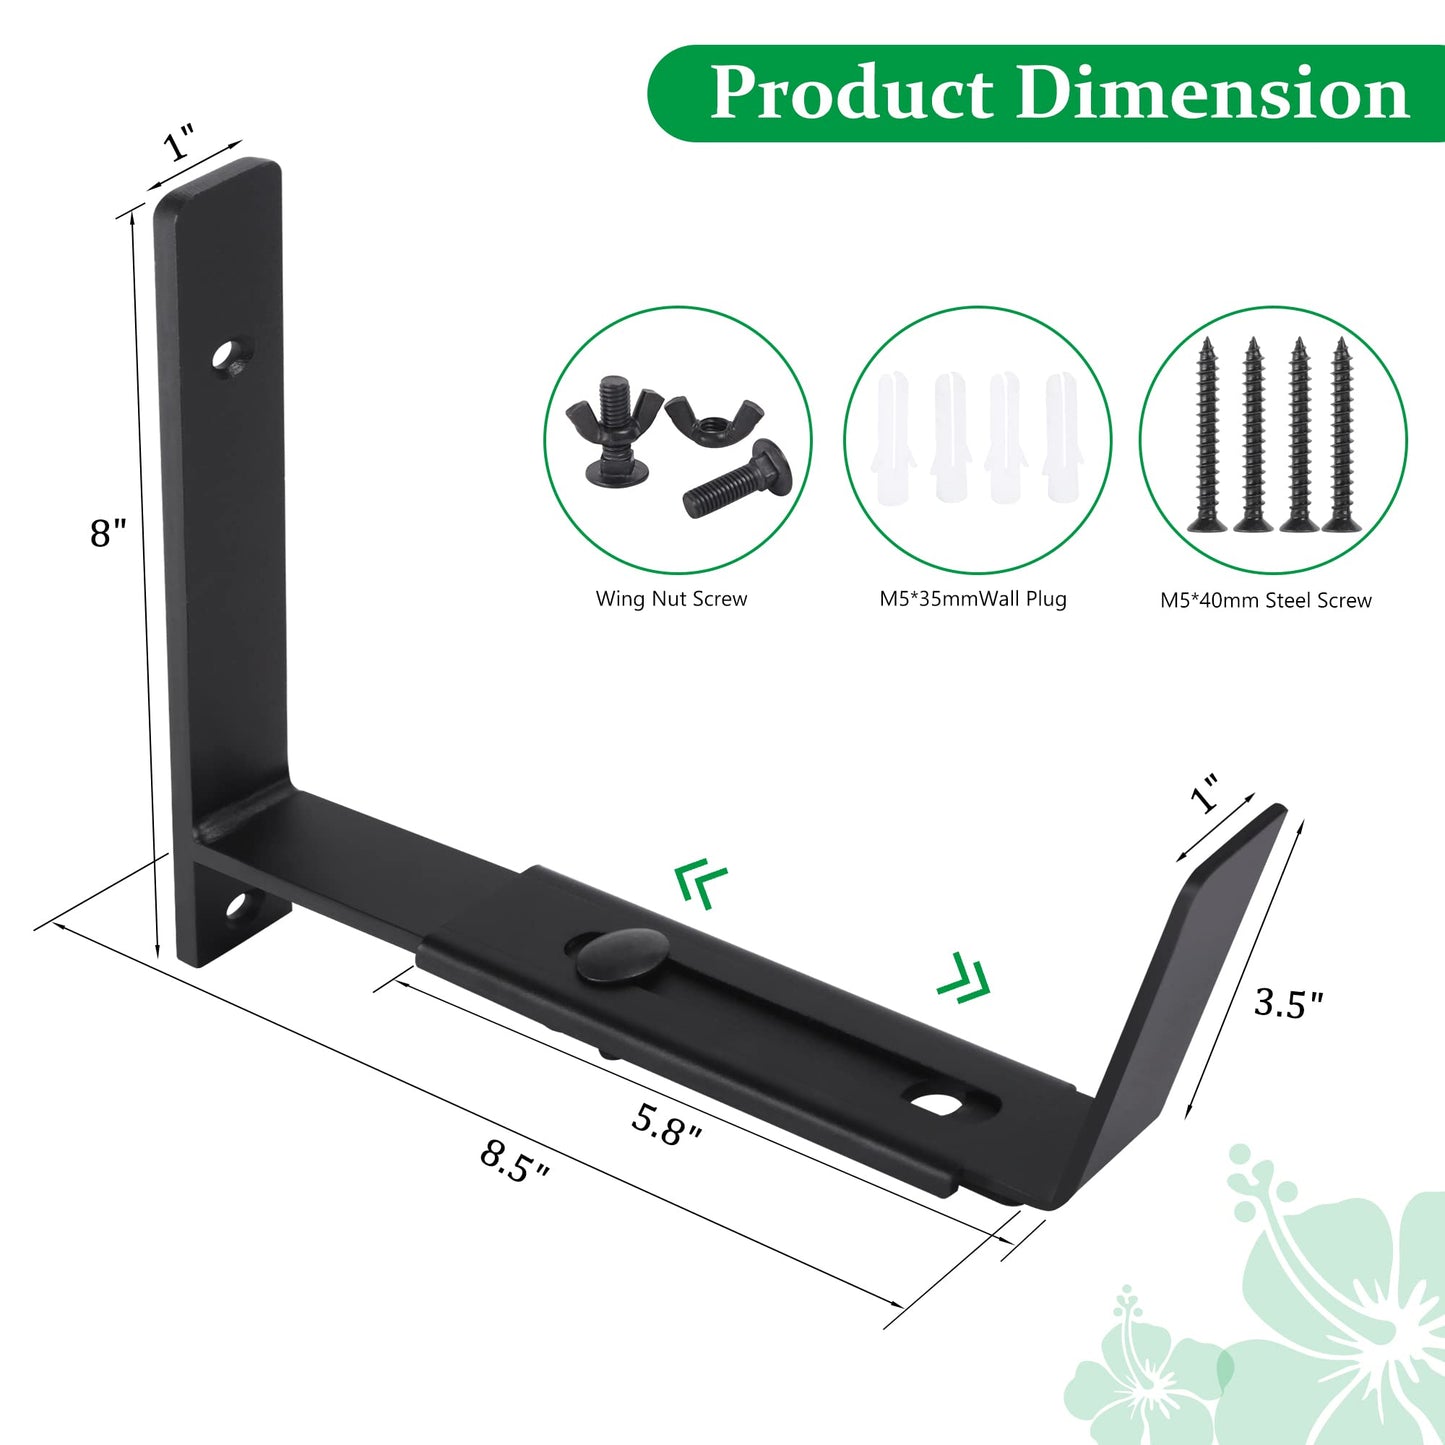 Maotong Adjustable Window Planter Box Brackets 6 Pack, Heavy Duty Wall Mount Flower Box Holder for Planter Box Depth (Front to Back) 6 to 12 Inches, Black